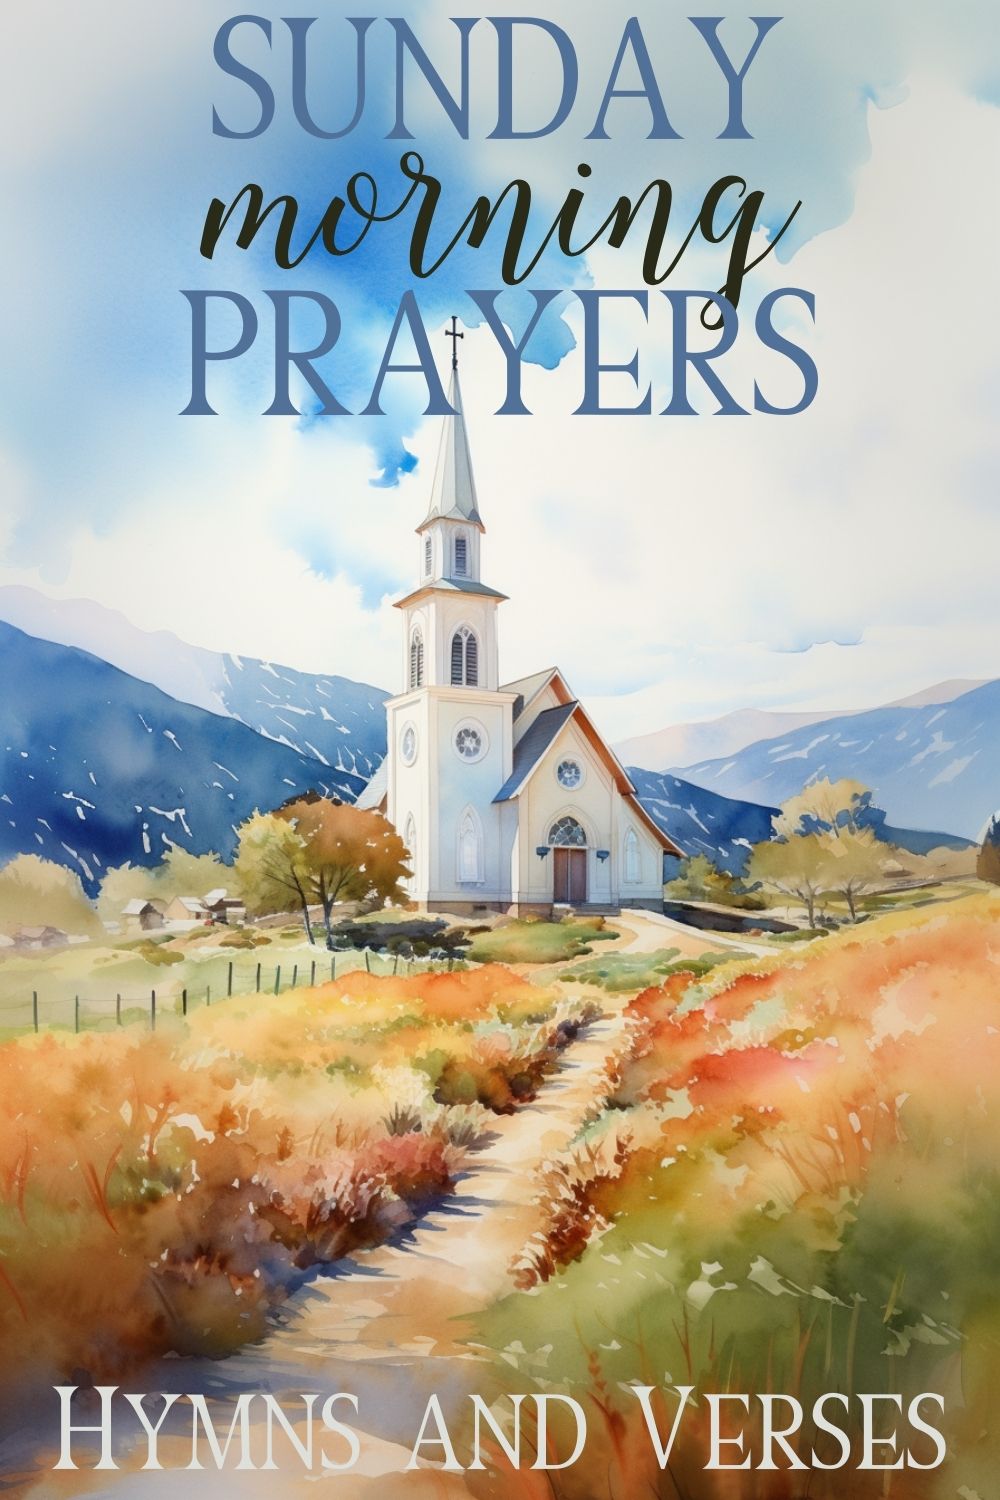 pinterest pin about Sunday morning prayers watercolor image of a church in the plains with beautiful mountains in the background